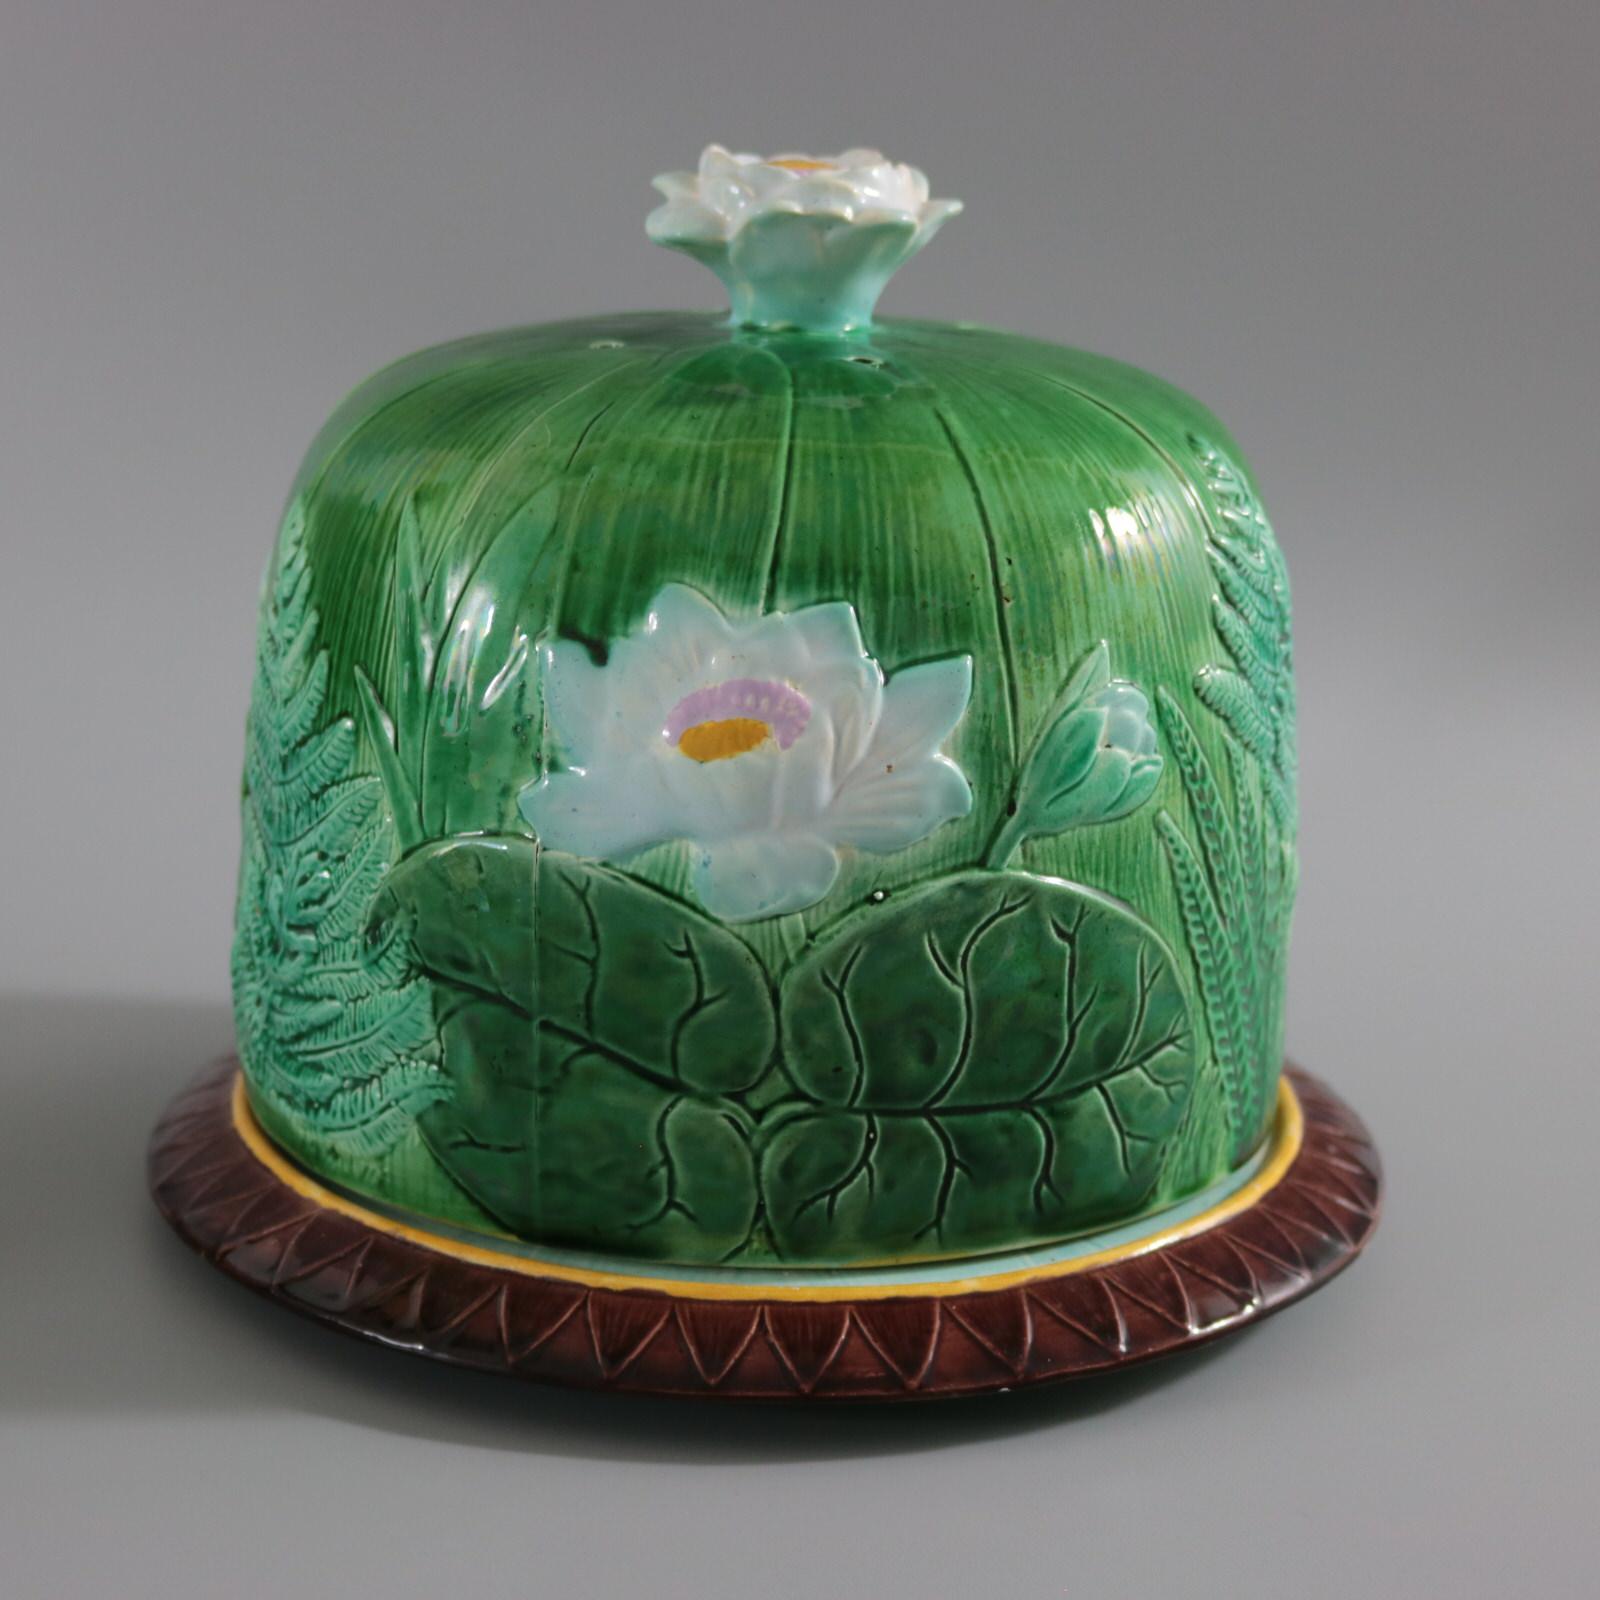 Holdcroft Majolica cheese keep which features fern fronds, and pond lily leaves and flowers. Colouration: green, white, brown, are predominant. The piece bears maker's marks for the Holdcroft pottery. Bears a pattern number, '36'. Book reference